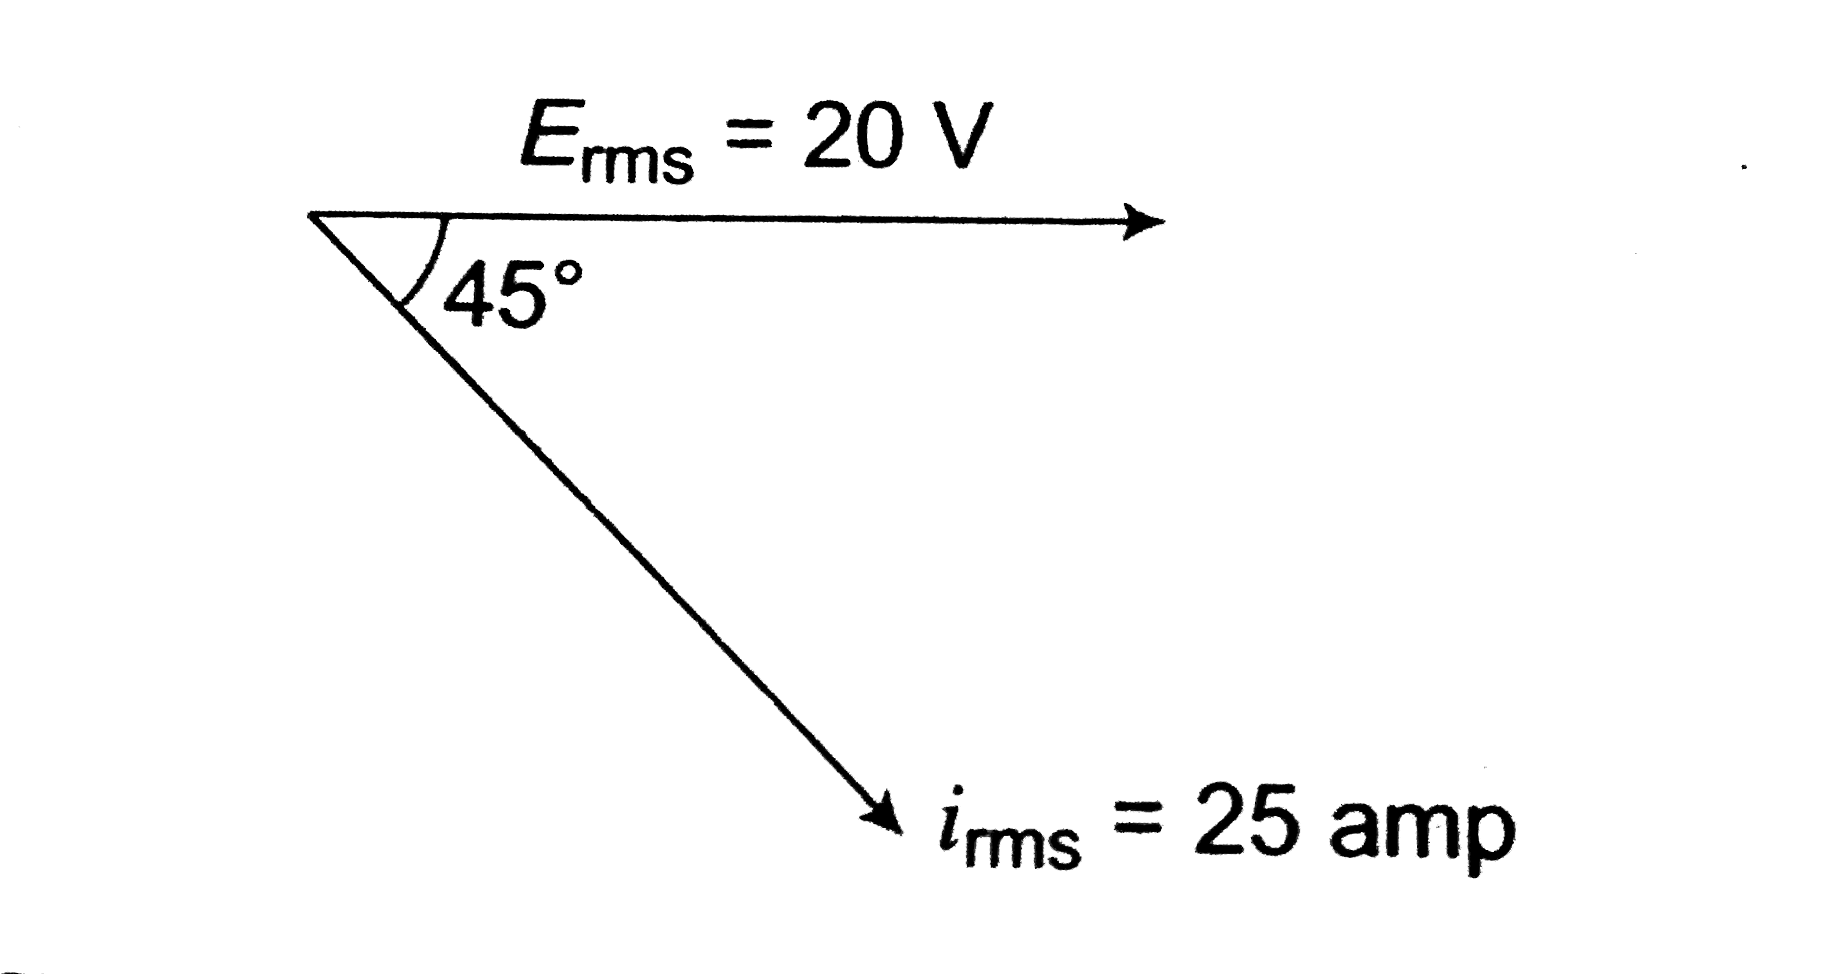 The vector diagram of current and voltage for a circuit as shown. The components of the circuit will be